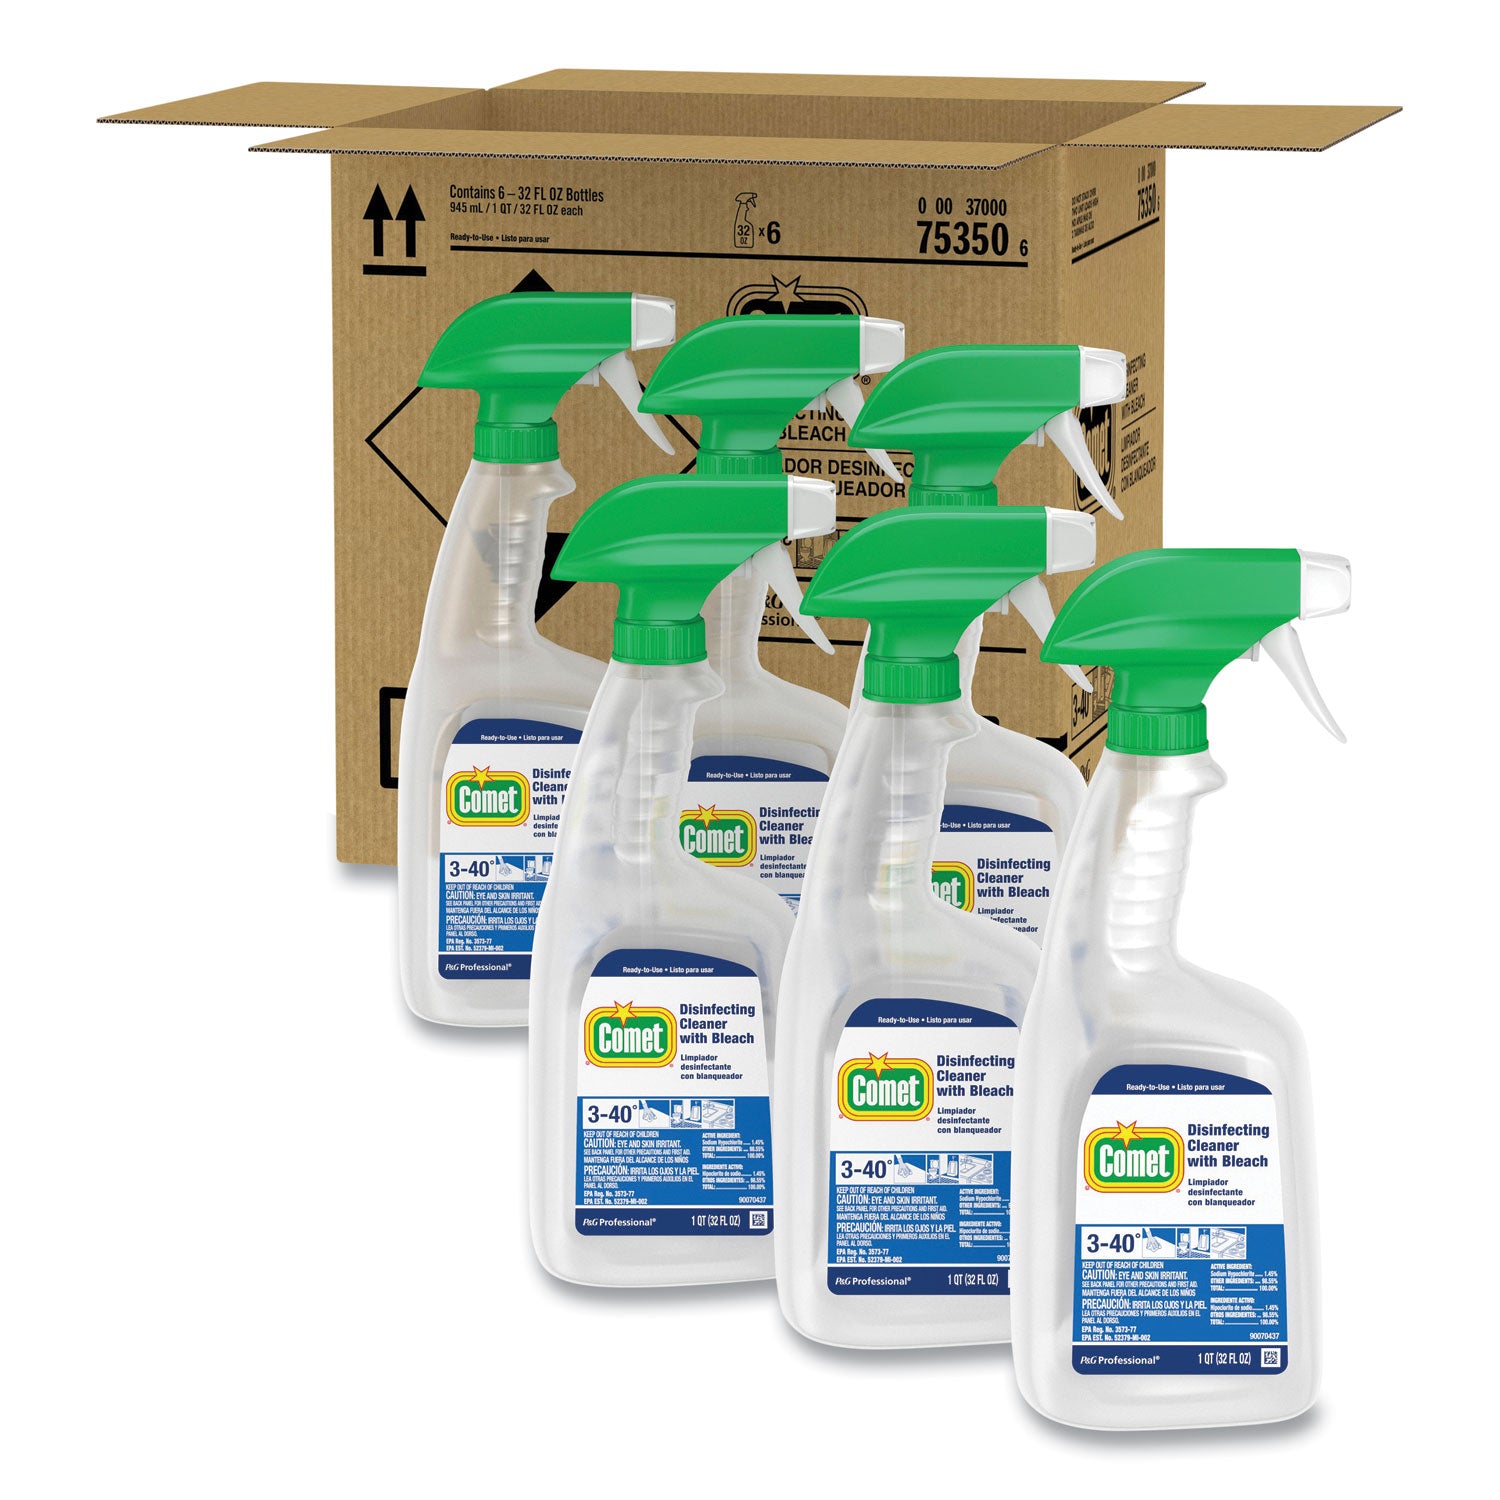 disinfecting-cleaner-with-bleach-32-oz-plastic-spray-bottle-fresh-scent-6-carton_pgc75350 - 1